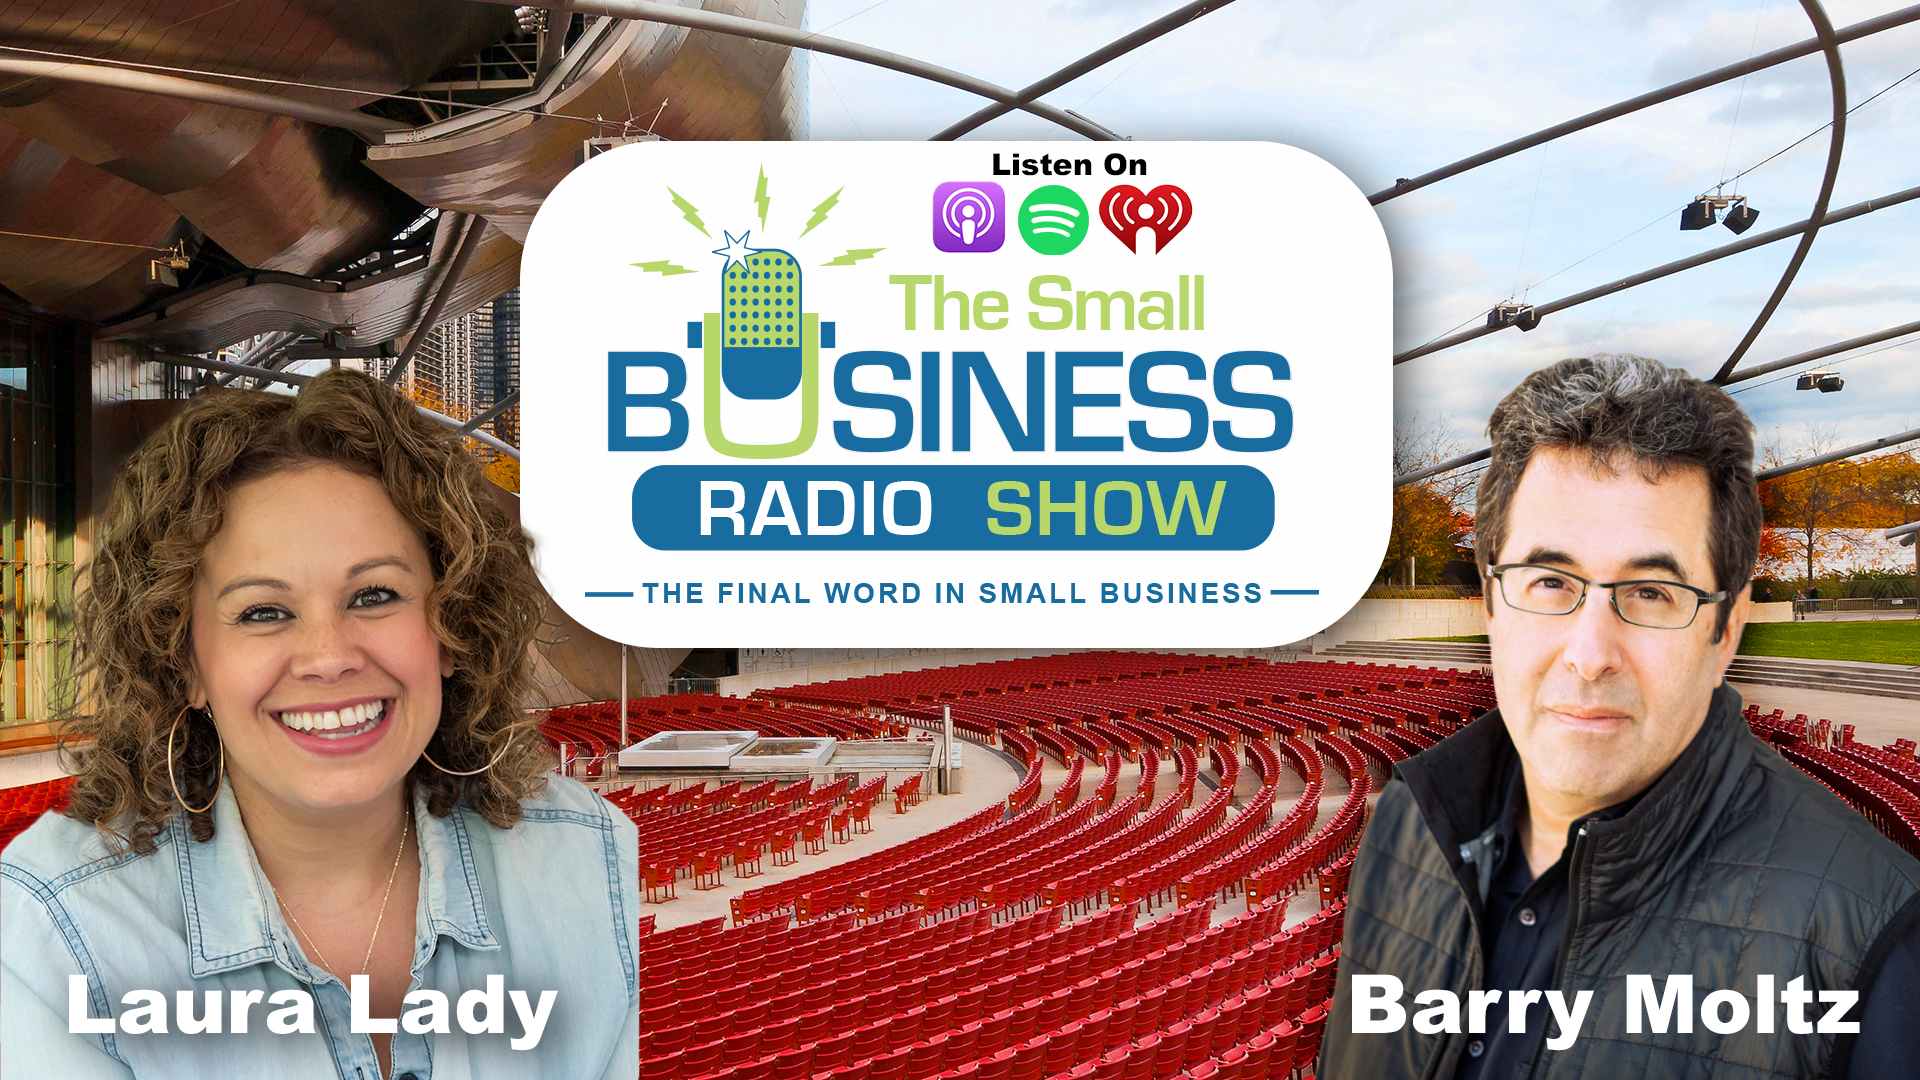 Laura Lady on The Small Business Radio Show FryAway